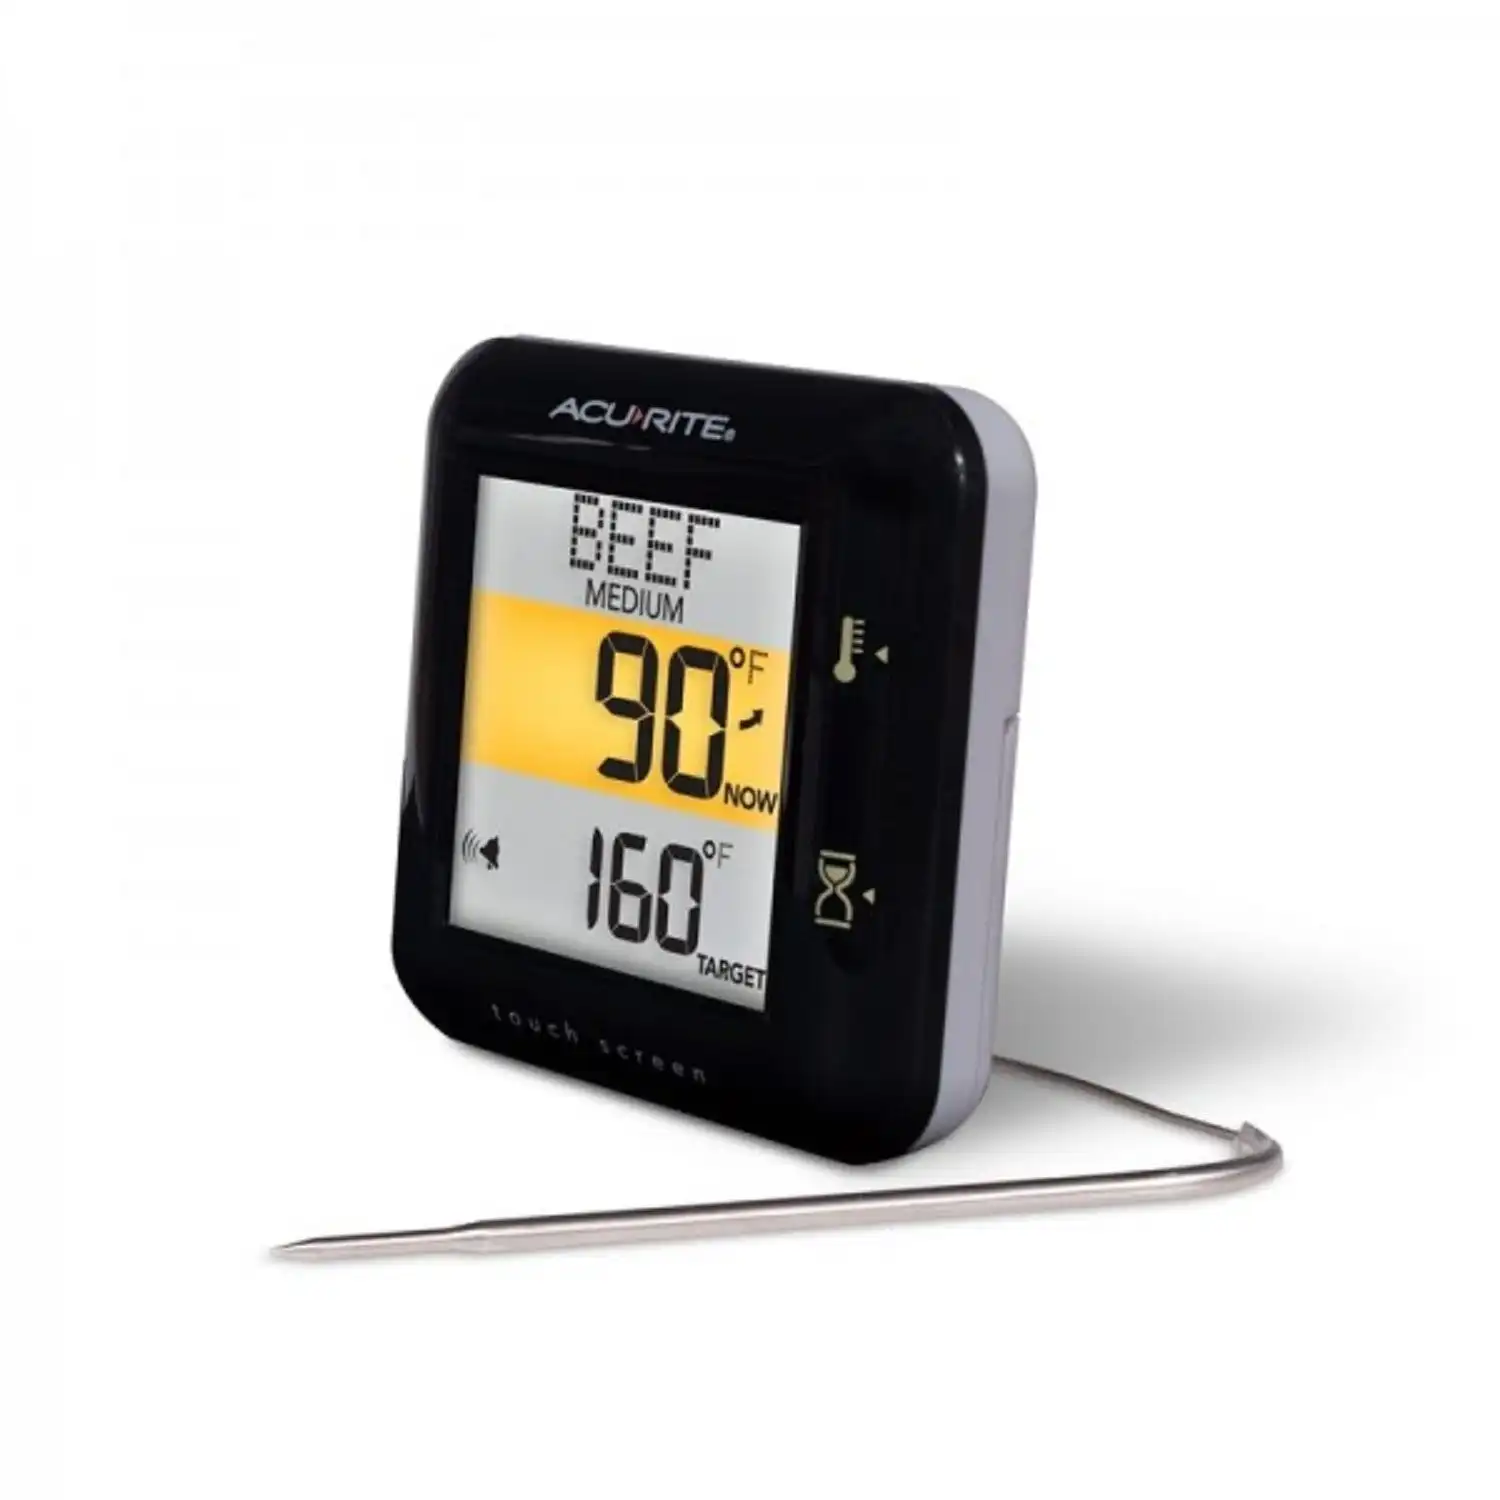 AcuRite Touchscreen Digital Thermometer & Timer